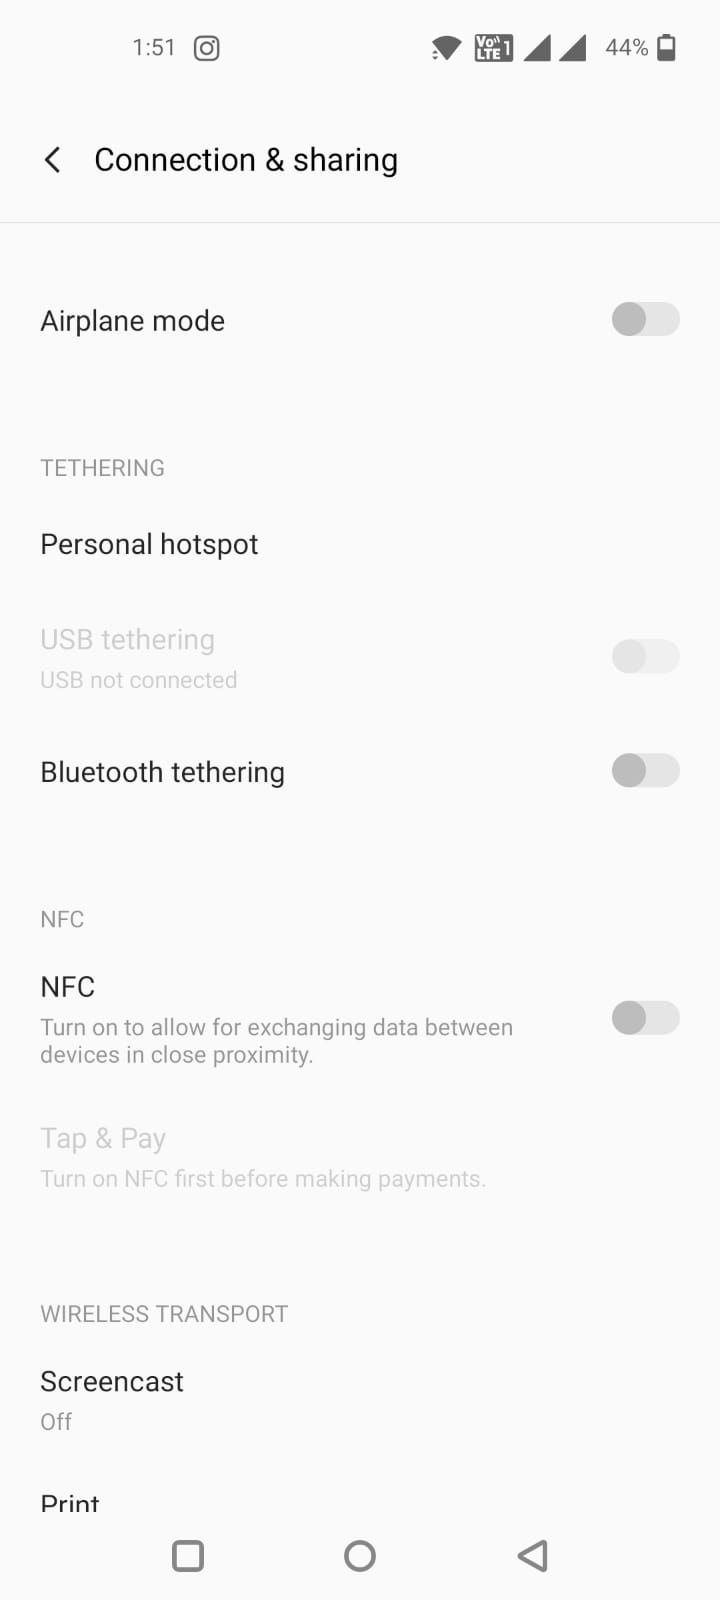 accessing the personal hotspot settings from the connection and sharing section